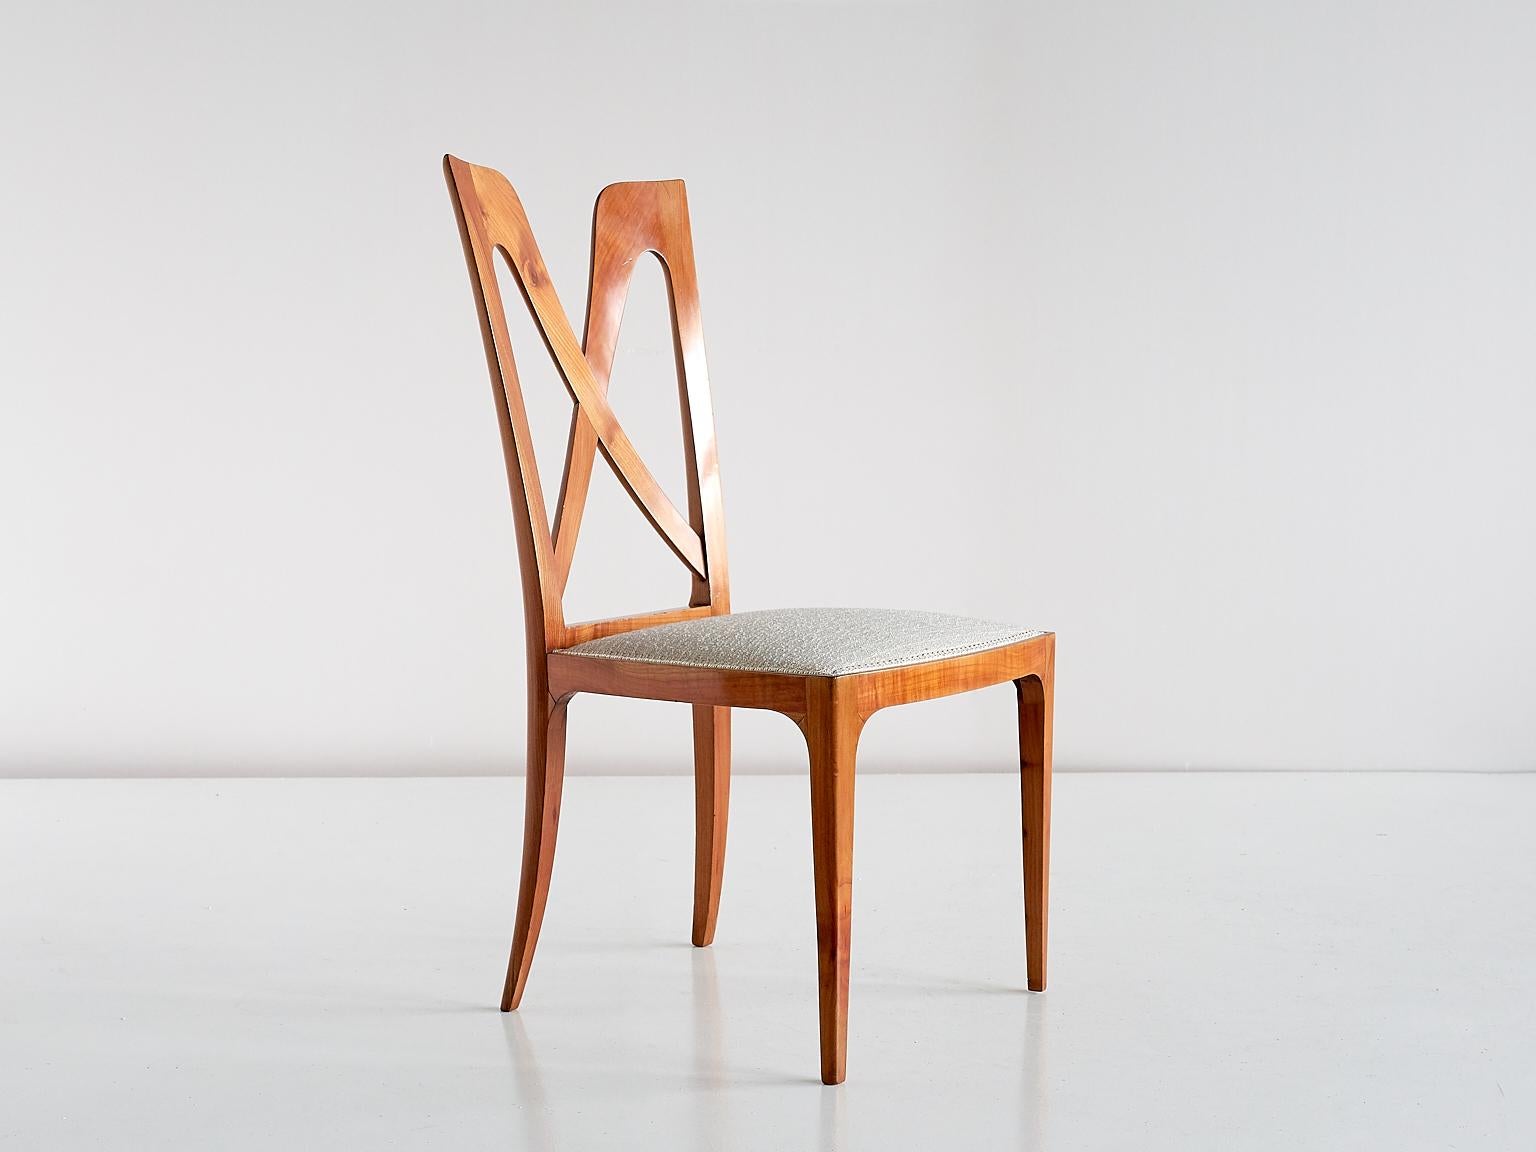 Set of Six Ulderico Carlo Forni Dining Chairs in Cherry Wood, Italy, 1940s For Sale 1